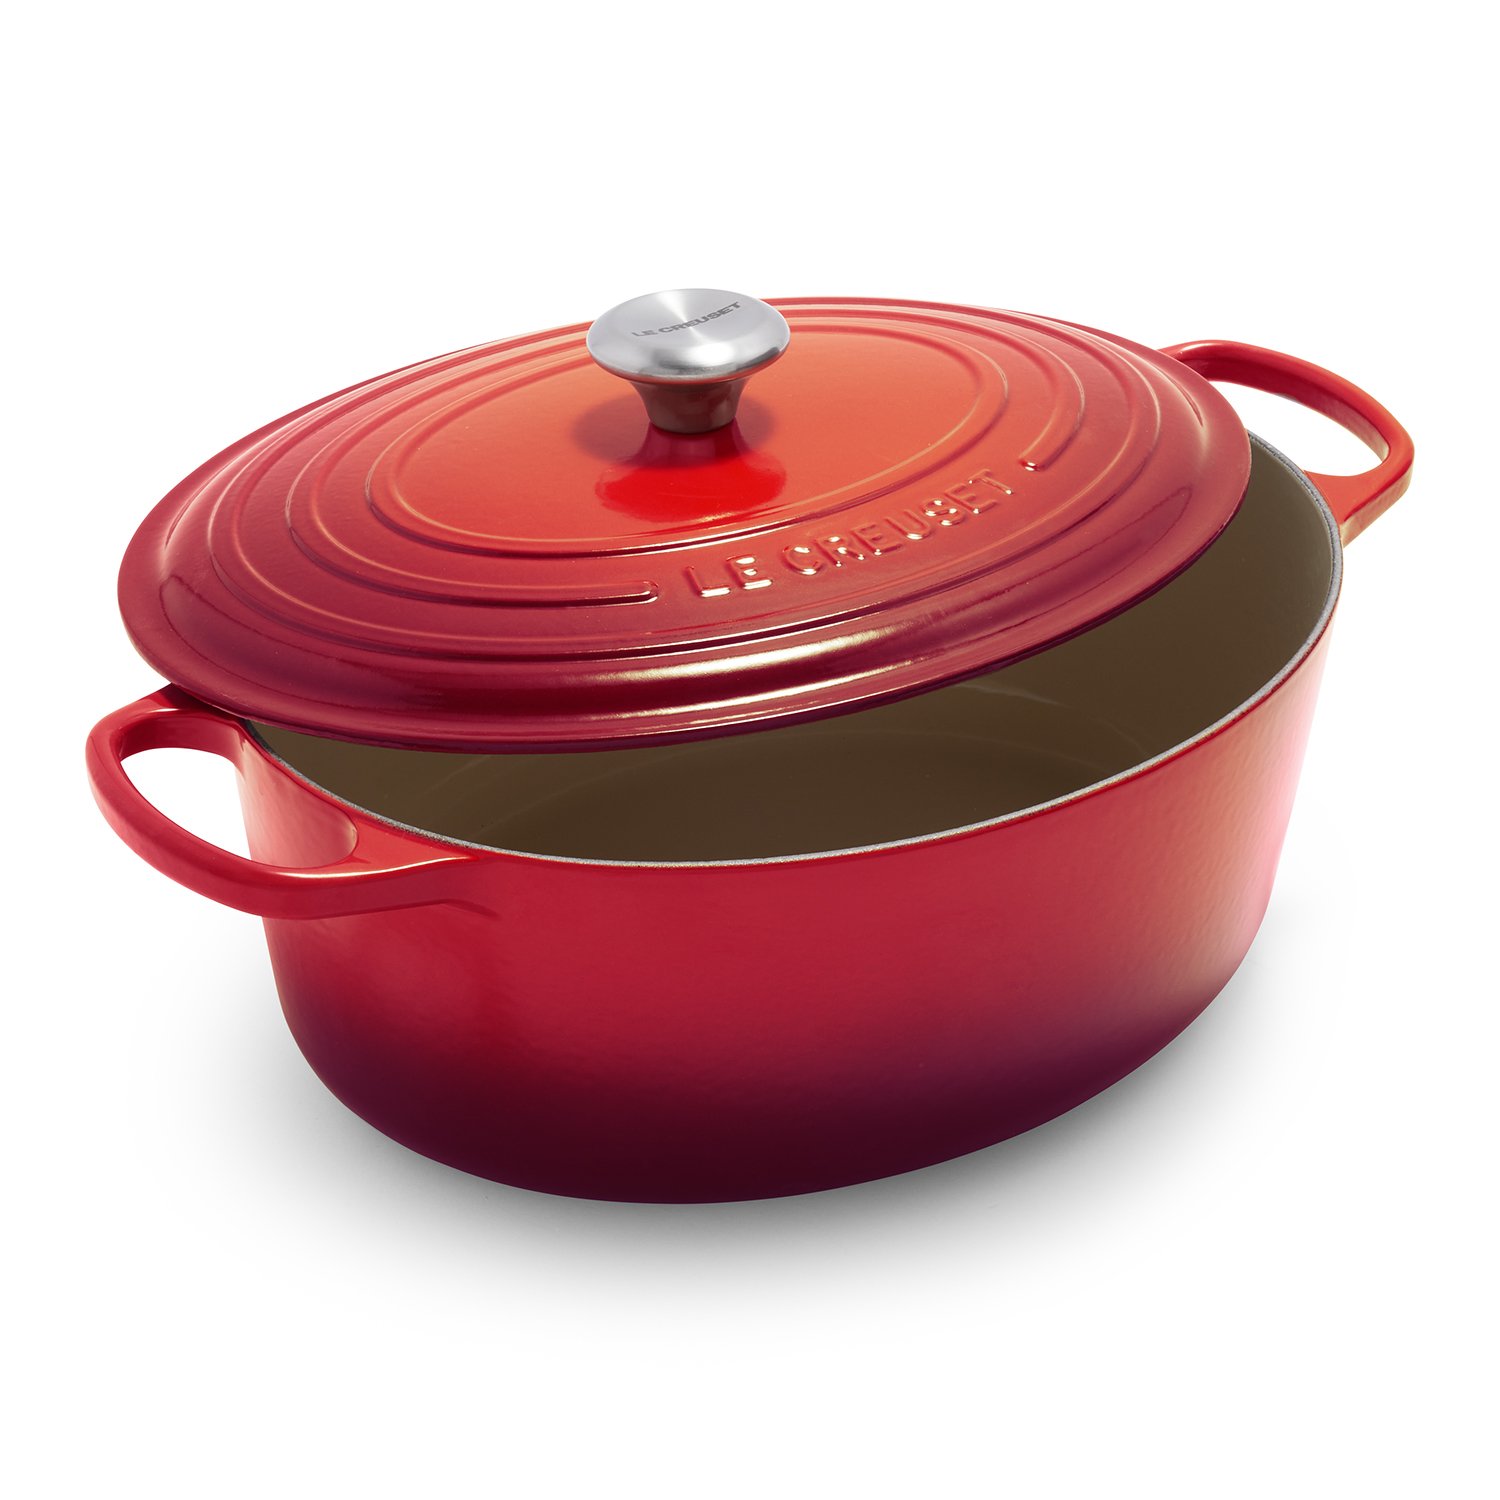 Buy Le Creuset's Signature Oval Dutch Oven for $140 off